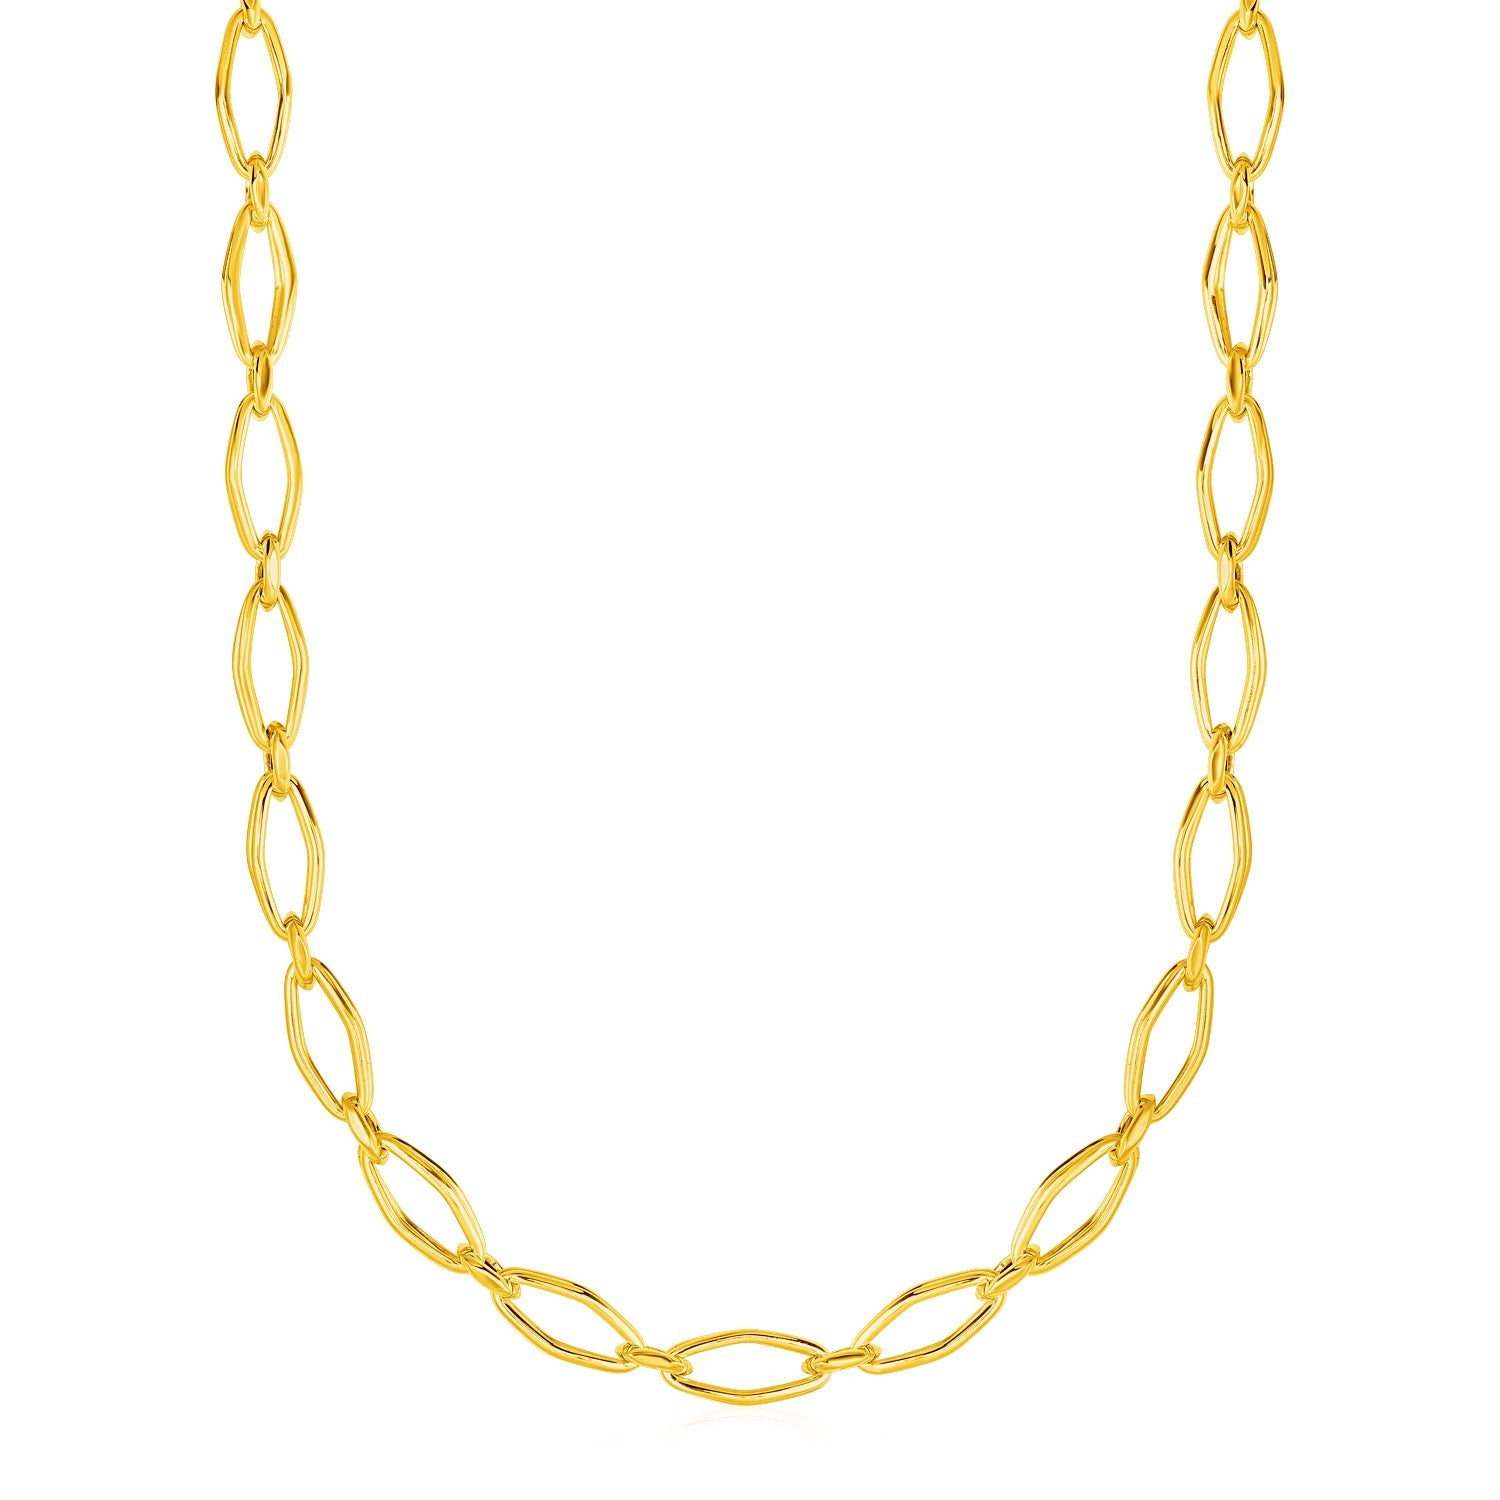 Polished Oval Marquise Link Necklace in 14k Yellow Gold